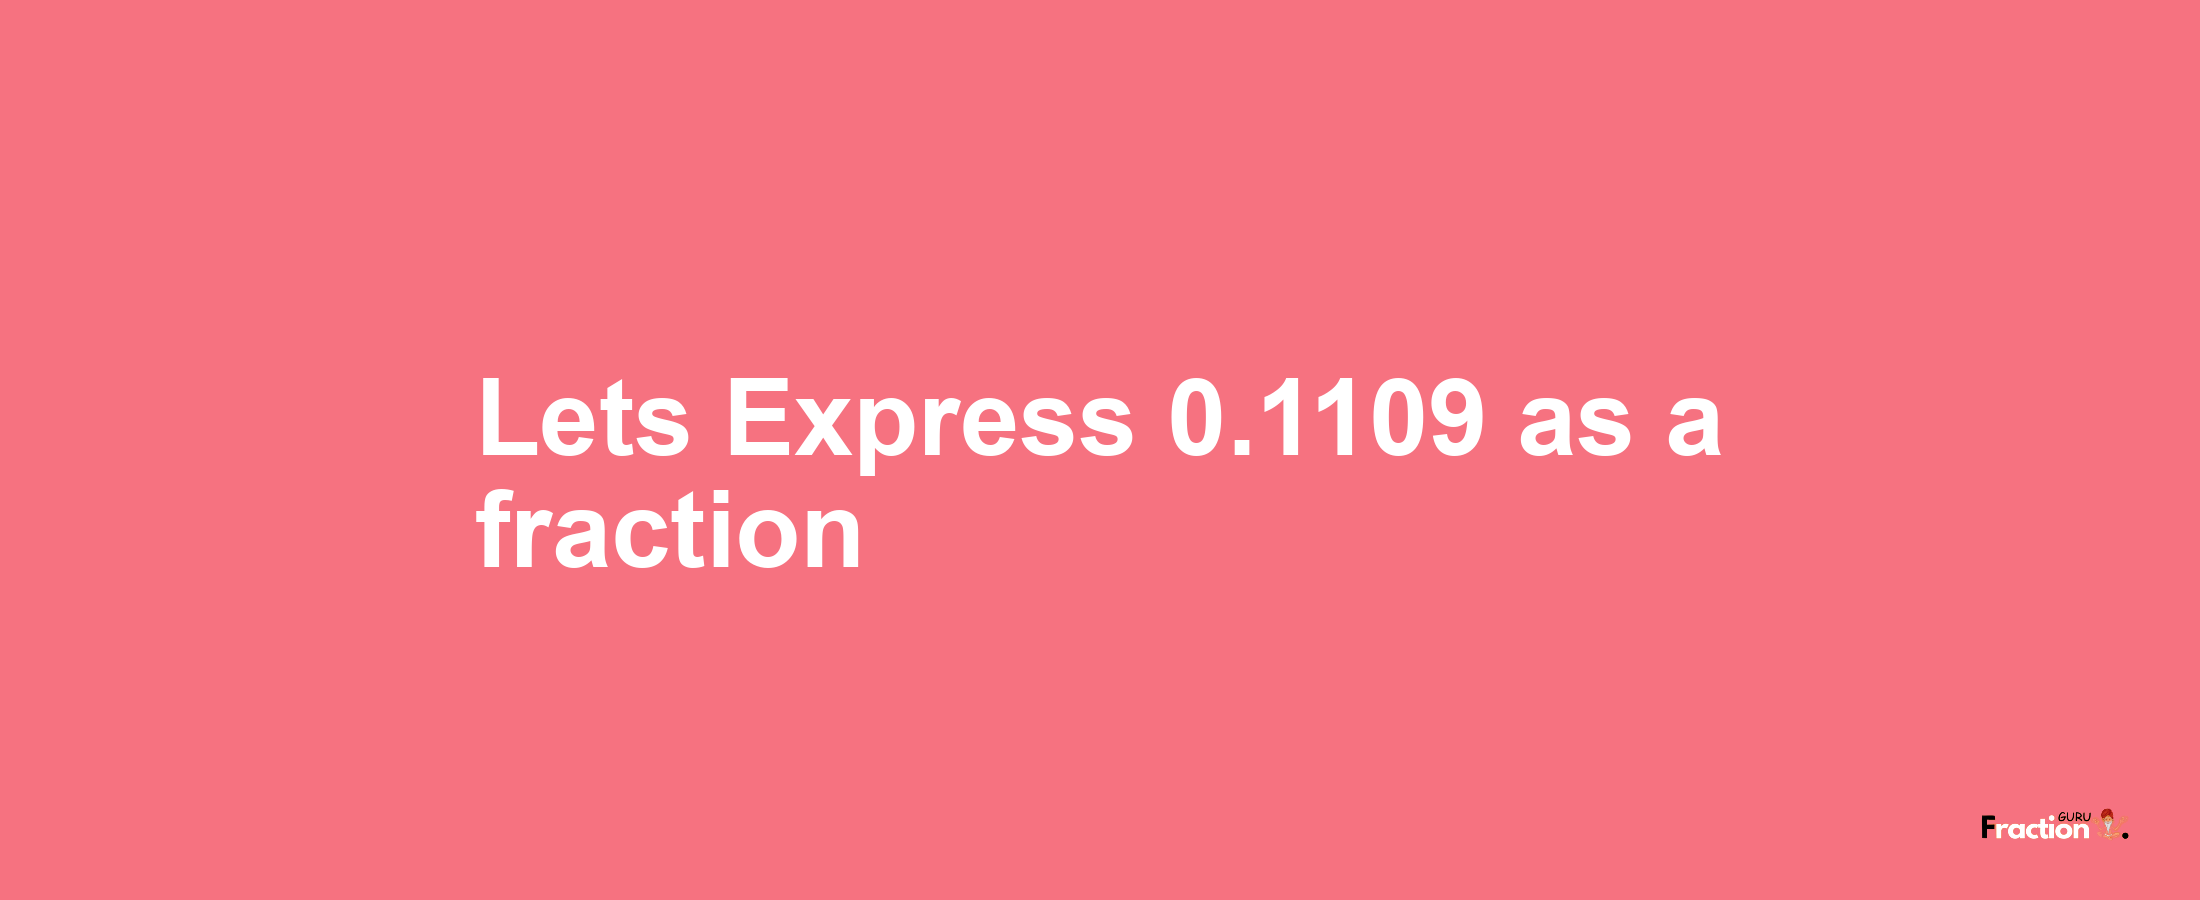 Lets Express 0.1109 as afraction